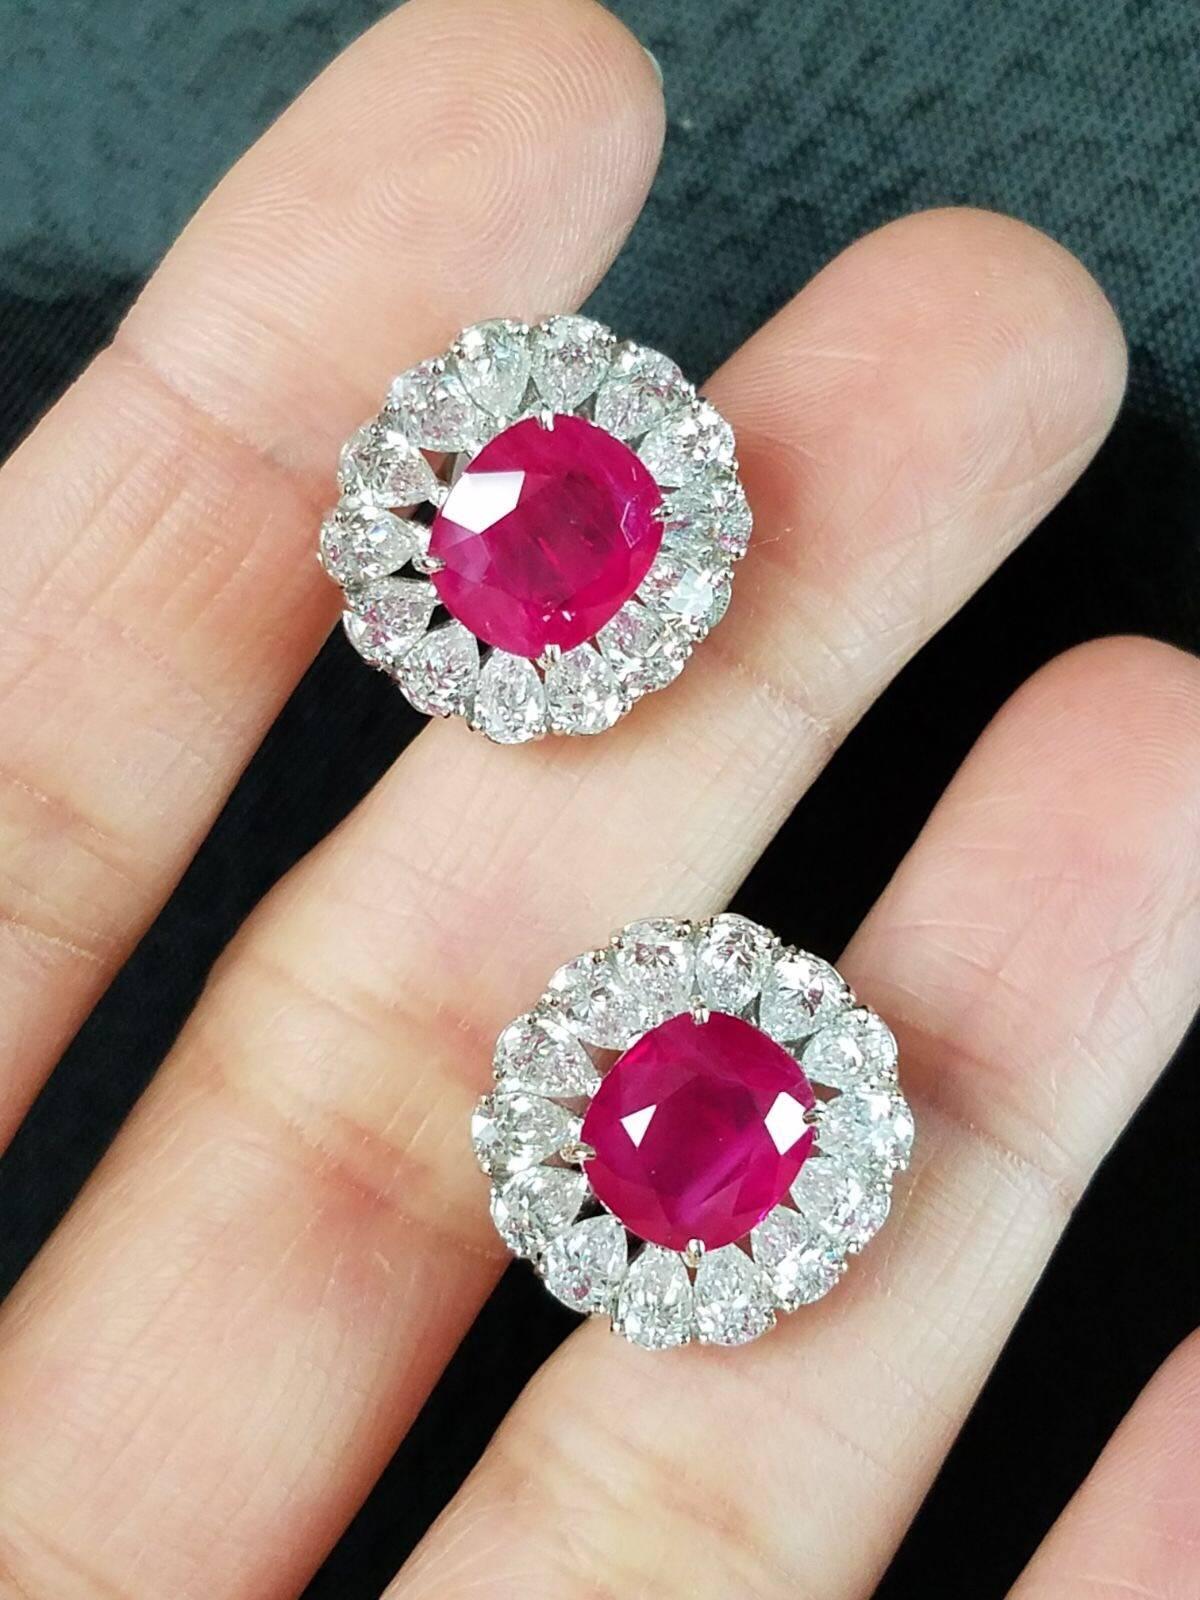 A beautiful pair of classic, oval cut heated Burma Ruby stud earrings, set in 18K white gold with pear shaped diamonds sorrounding the centre stone, with an omega backing.

Stone Details: 
Stone: Burma Ruby
Carat Weight: 8.11 Carats

Diamond